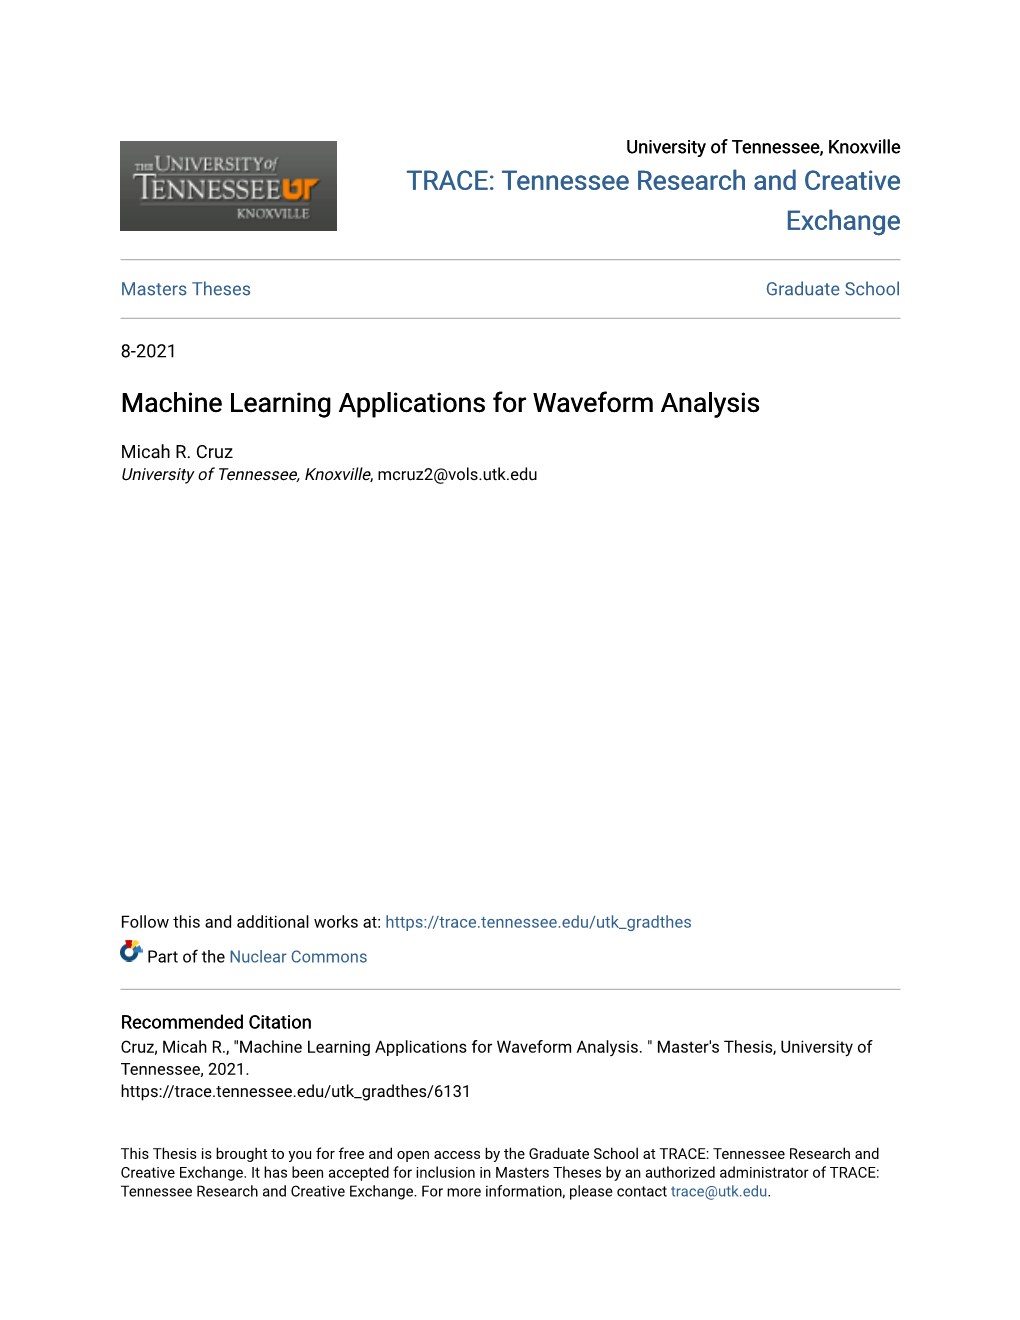 Machine Learning Applications for Waveform Analysis